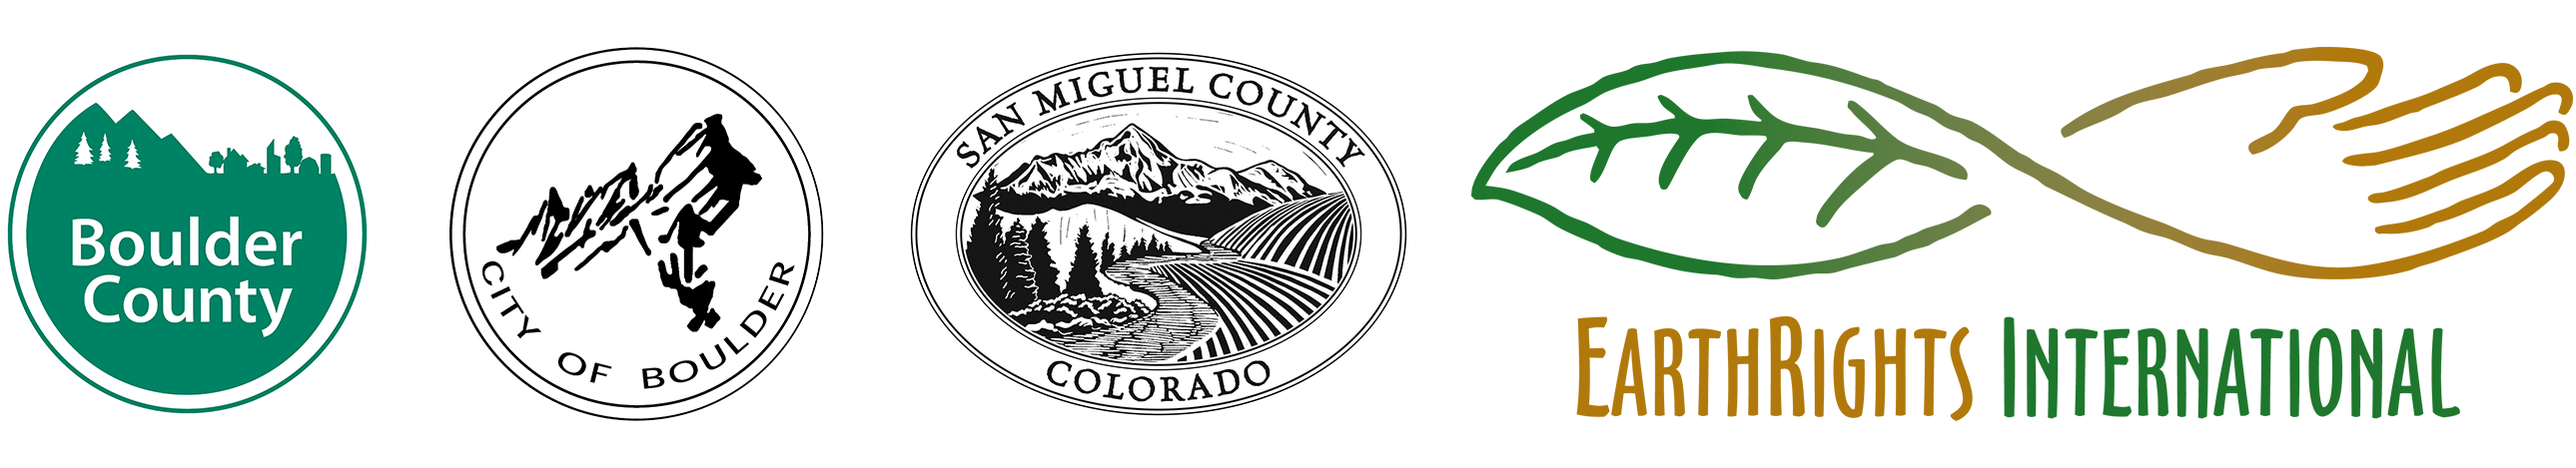 Logos for Boulder County, City of Boulder, San Miguel County, and EarthRights International